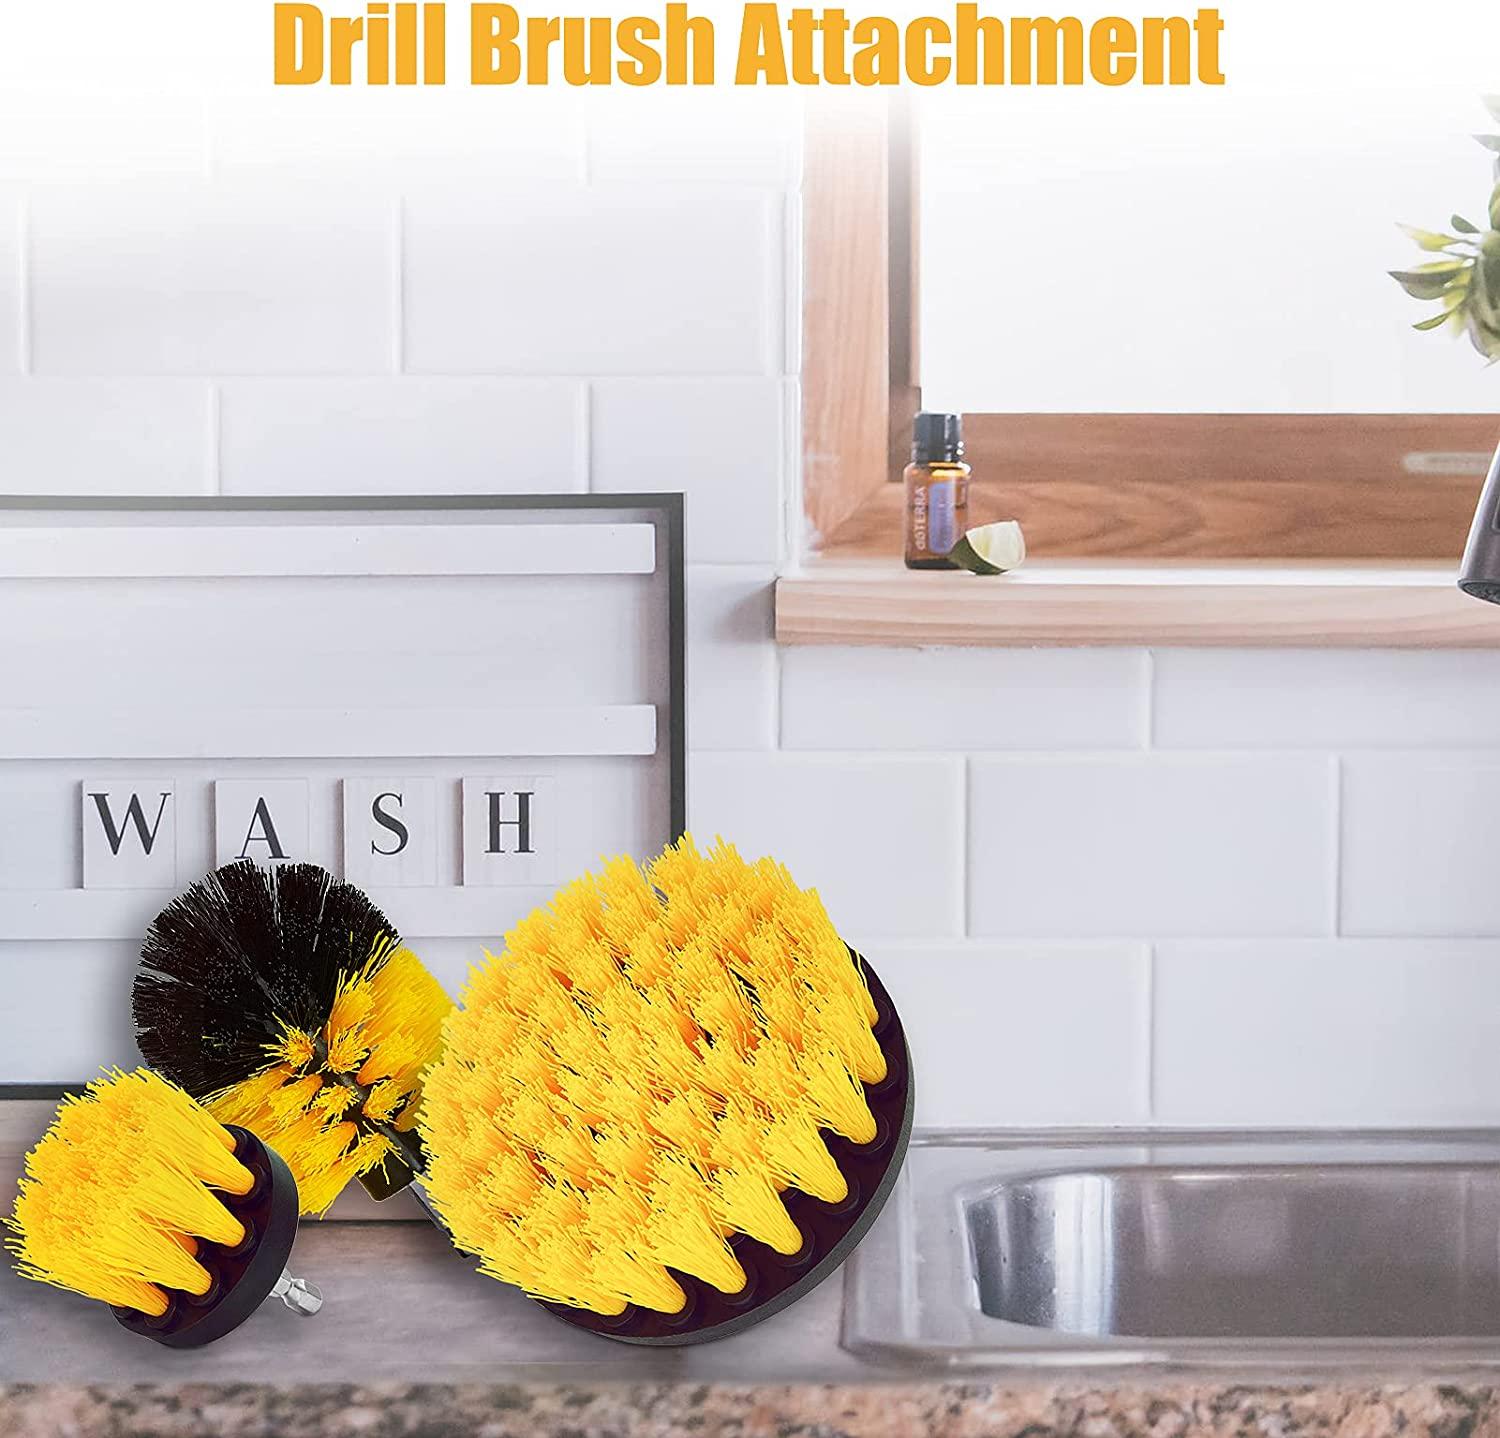 Japan Grout Brush Tile Grout Cleaner Cleaning Tool For Bathroom